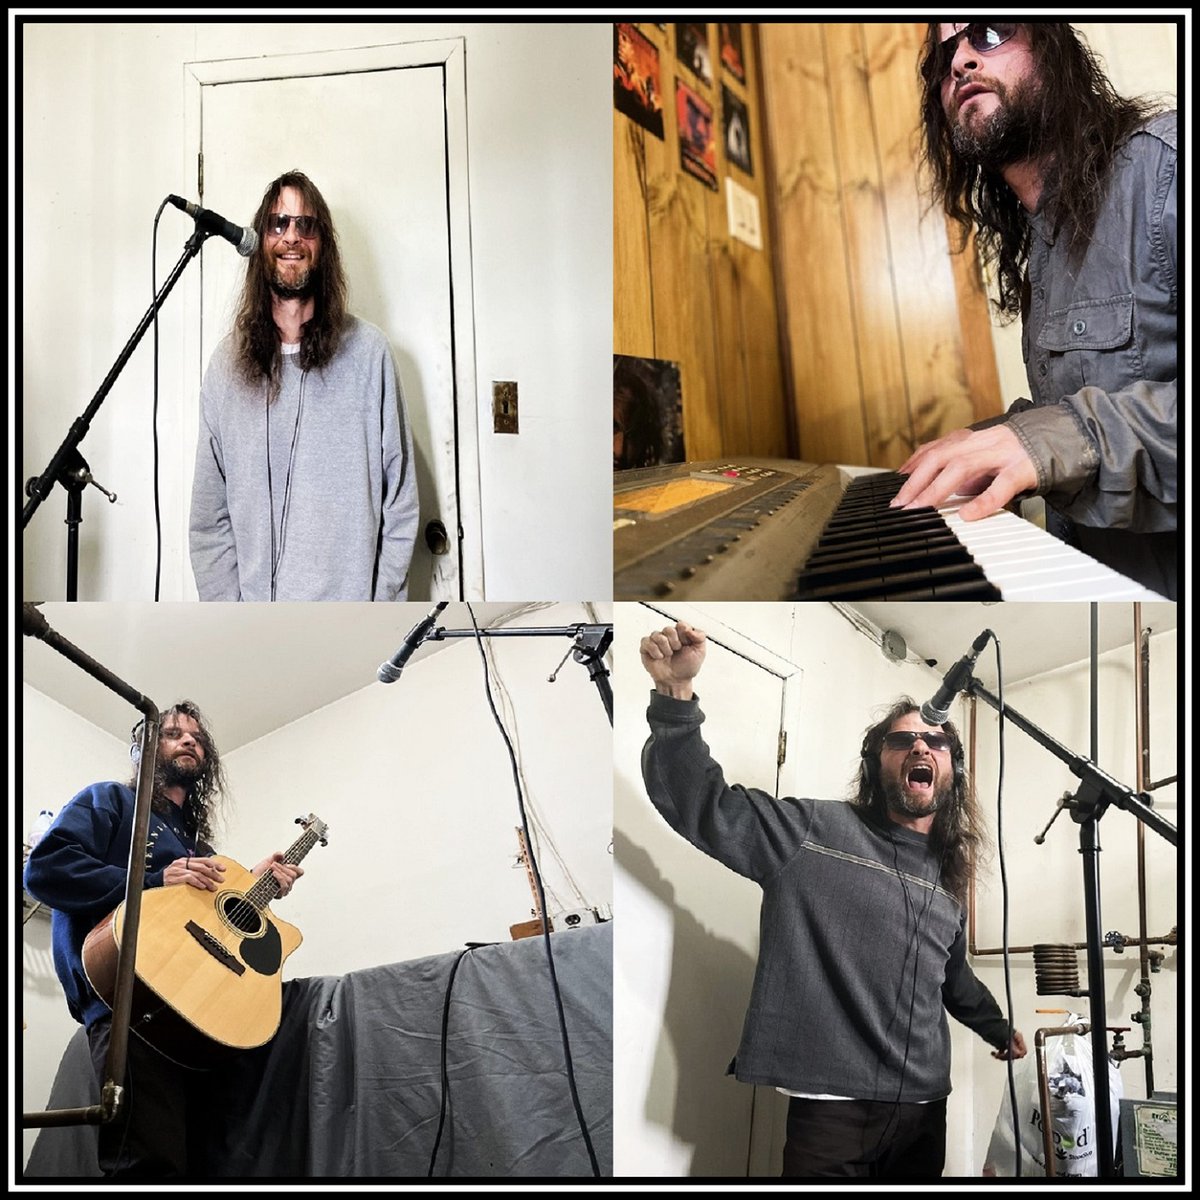 Recording the album 'Dead Again' vocals/guitar/bass/keyboard - Jared Michael Pihl open.spotify.com/album/1cS7PMEd… youtube.com/channel/UCuWCU… #SpotifyRT @ITHERETWEETER1 #YouTube #rockmusic #NewMusic #vocal #guitar